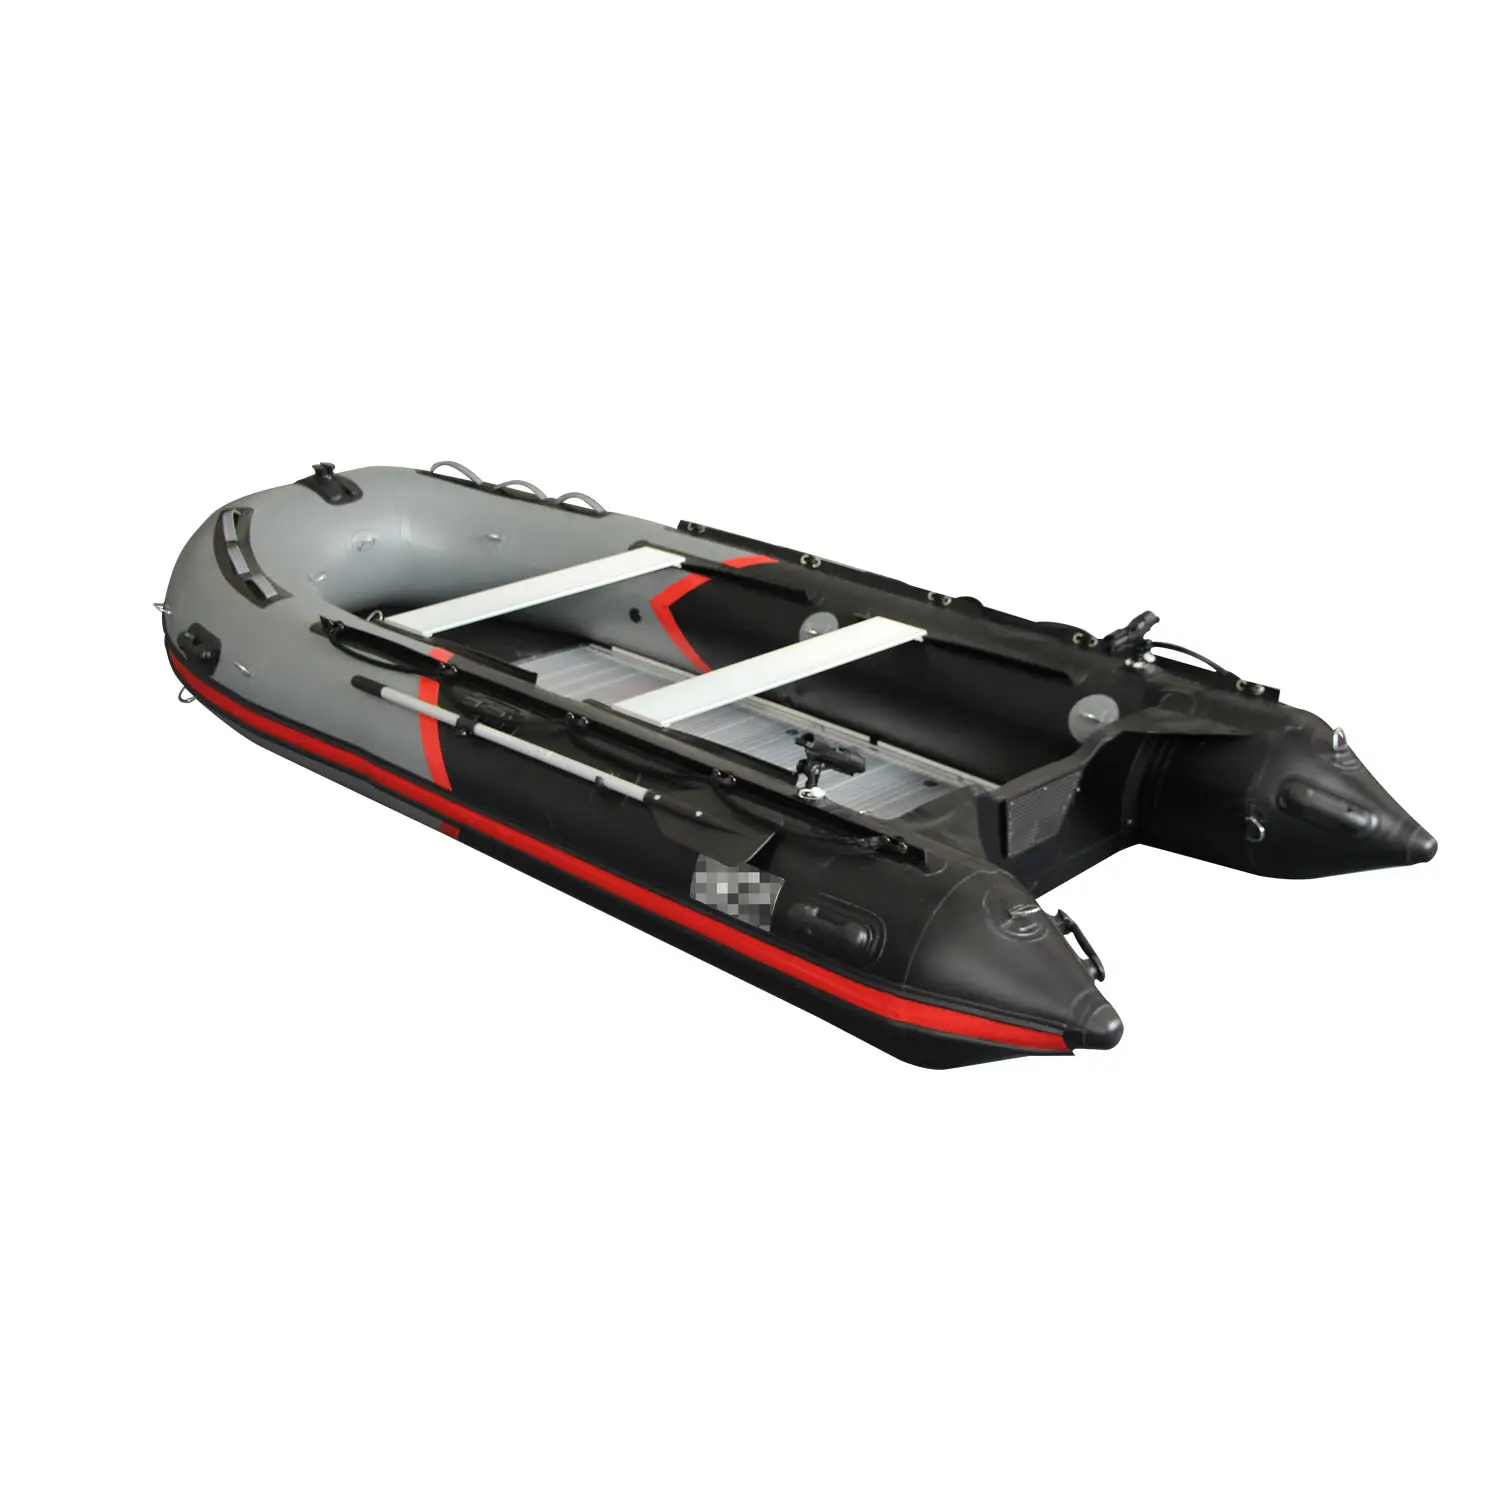 New Style Raft Inflatable Boat Rowing PVC or Hypalon Material YLS-230 Sport Boat